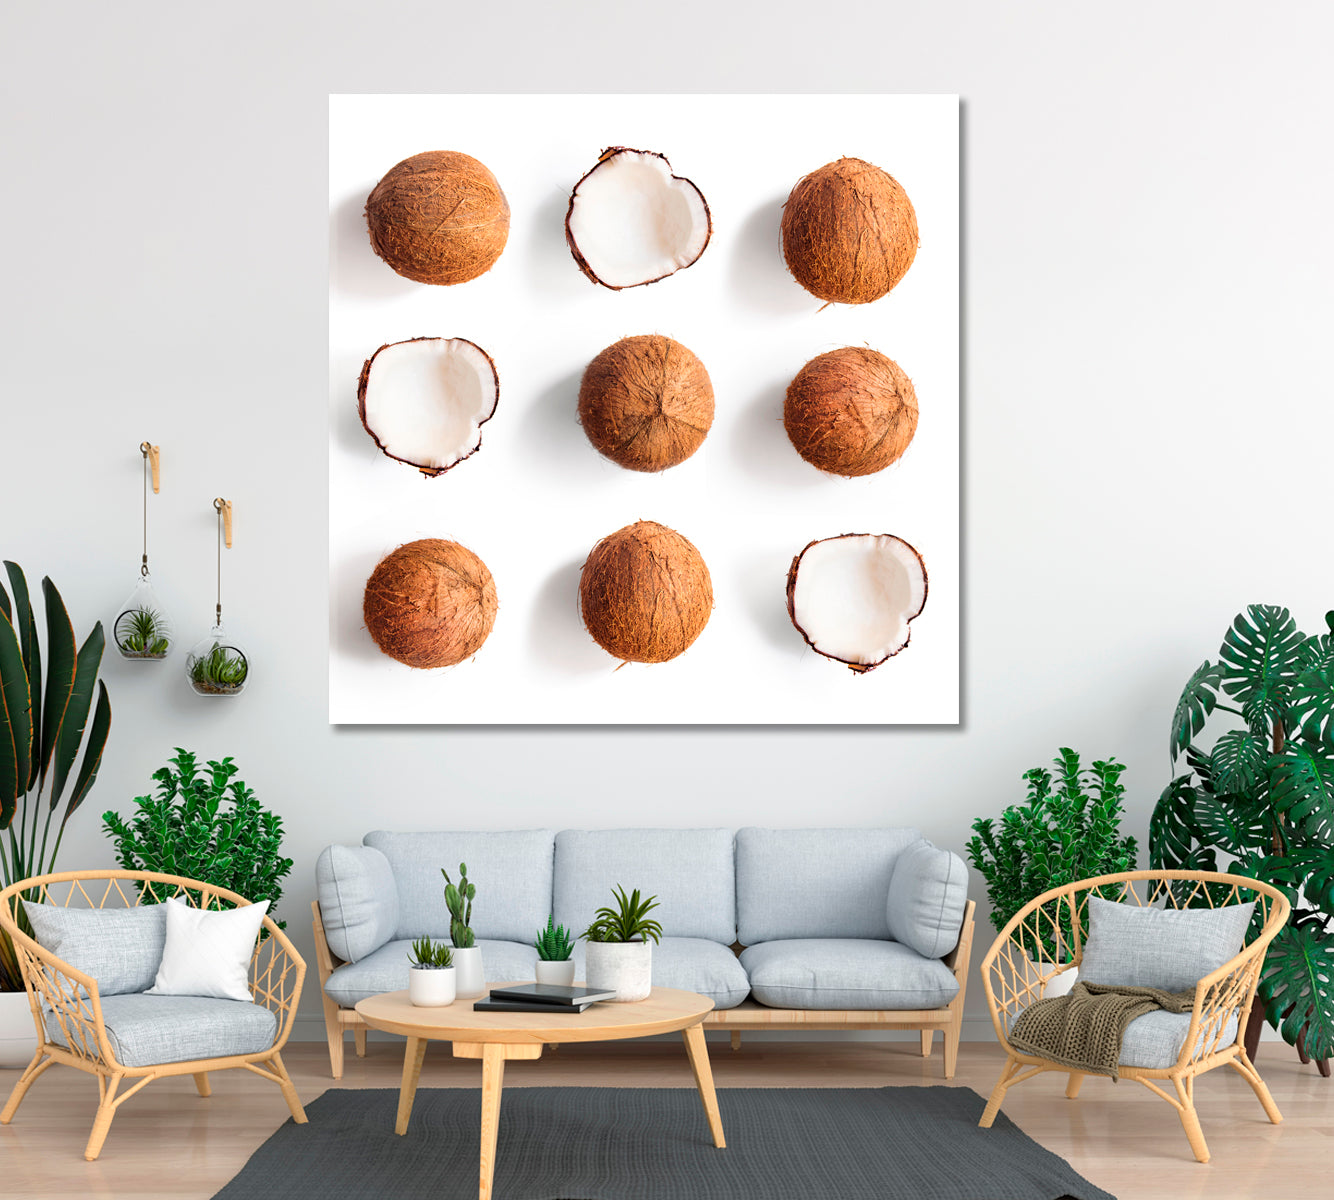 Coconuts Canvas Print ArtLexy 1 Panel 12"x12" inches 